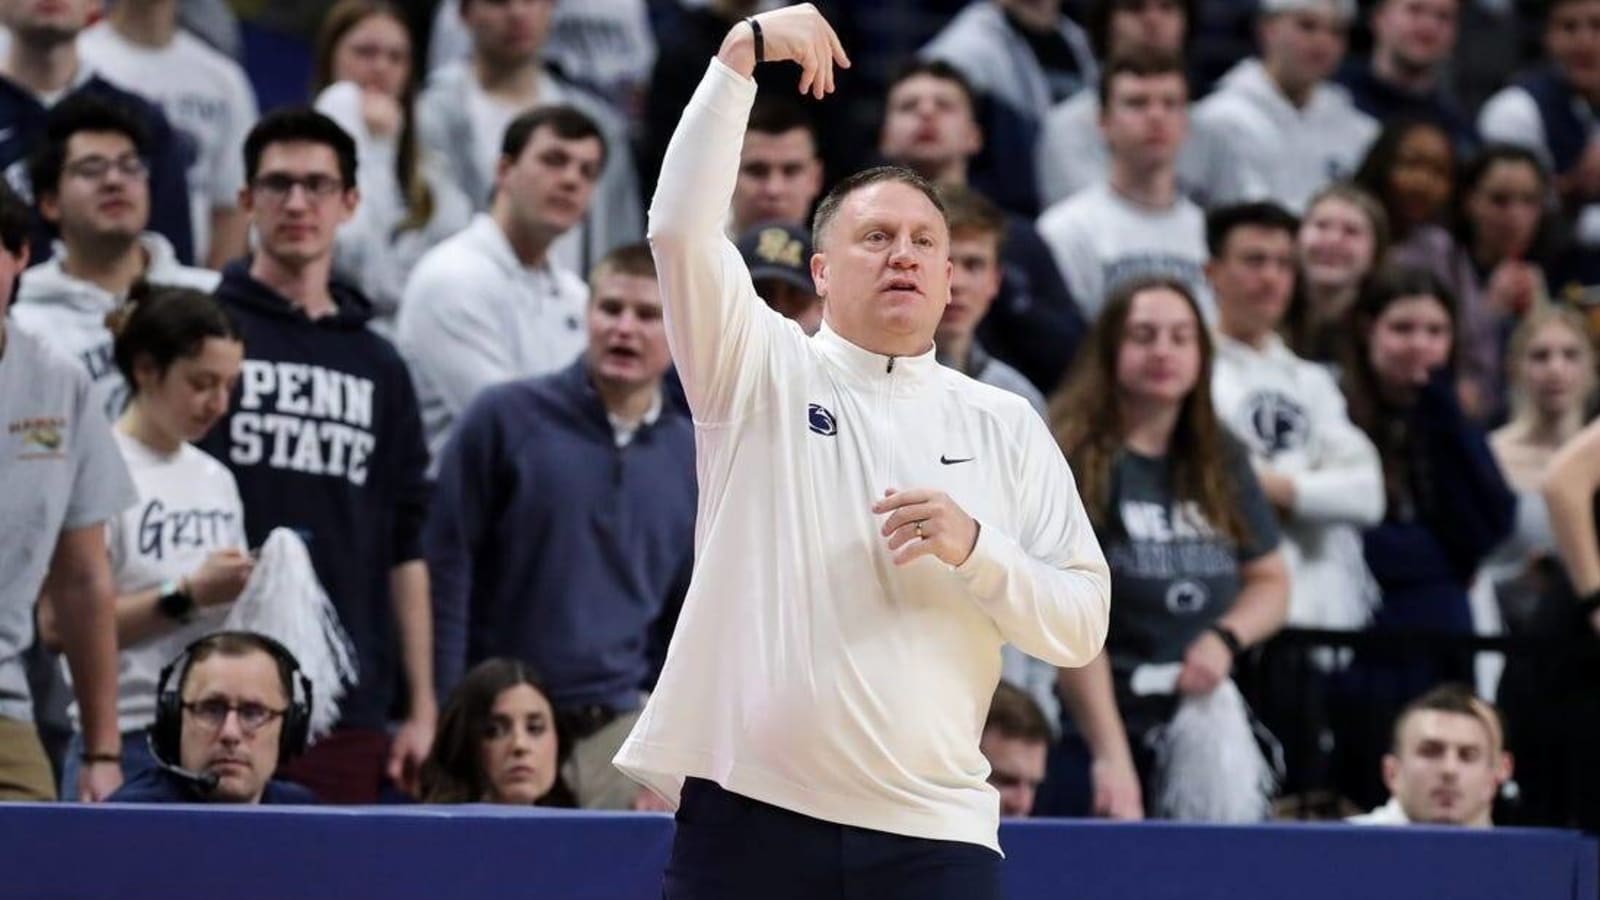 Penn State returns to Rec Hall to face No. 12 Illinois